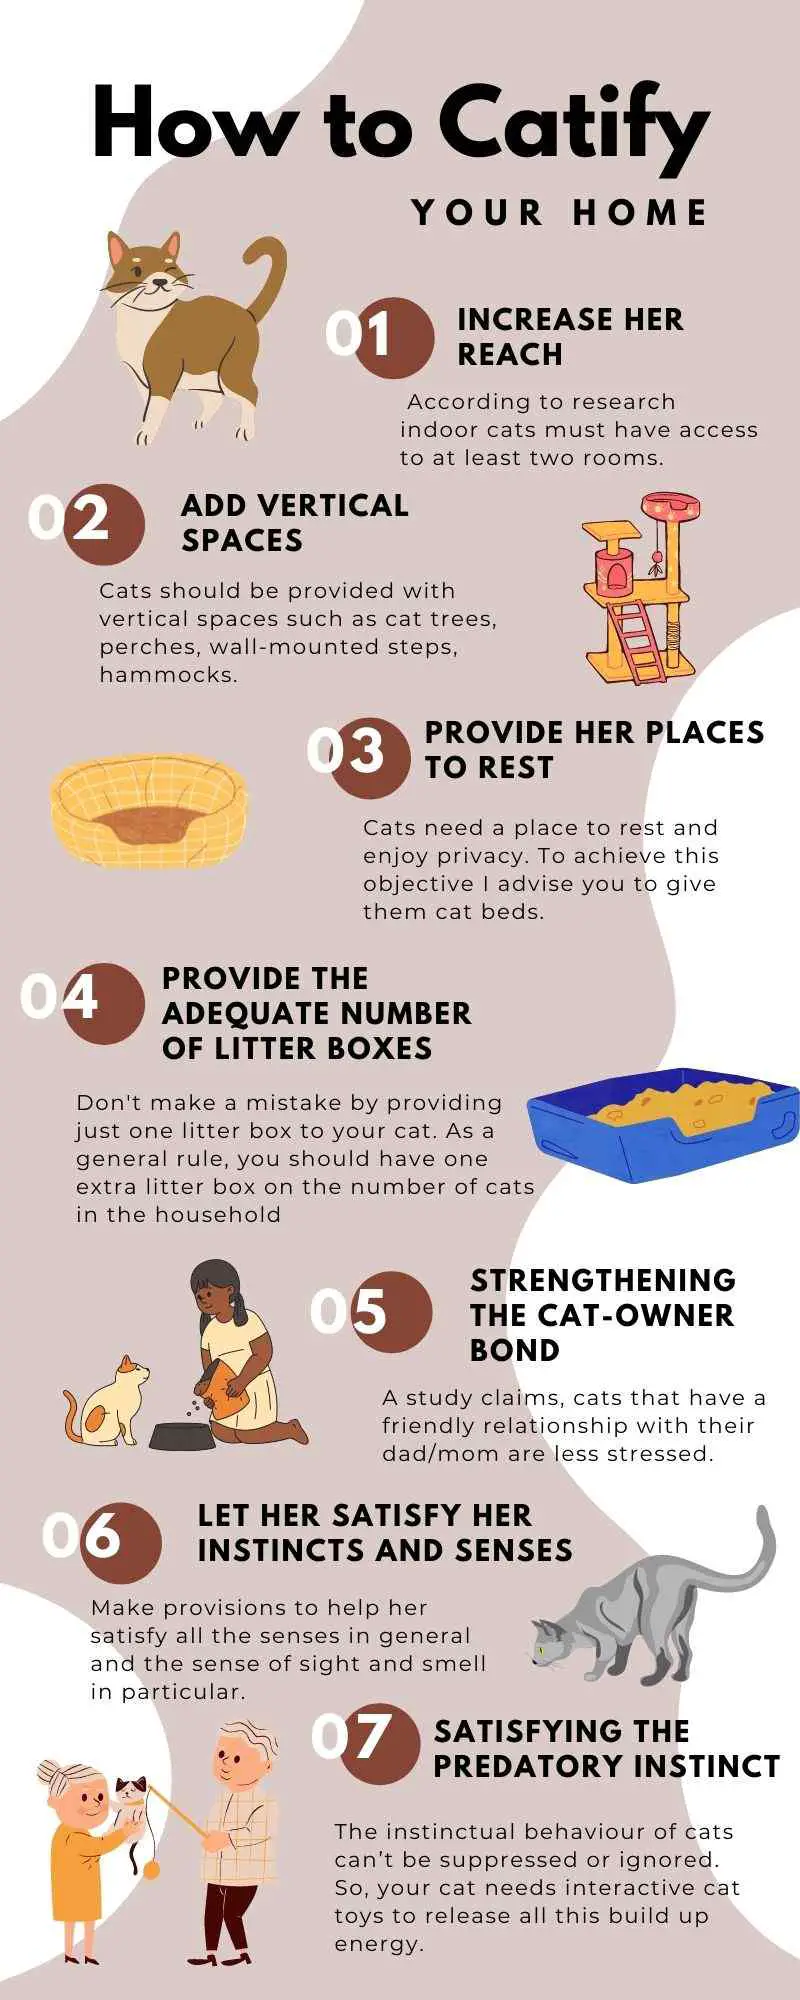 This Infographic shows you how to catify your home